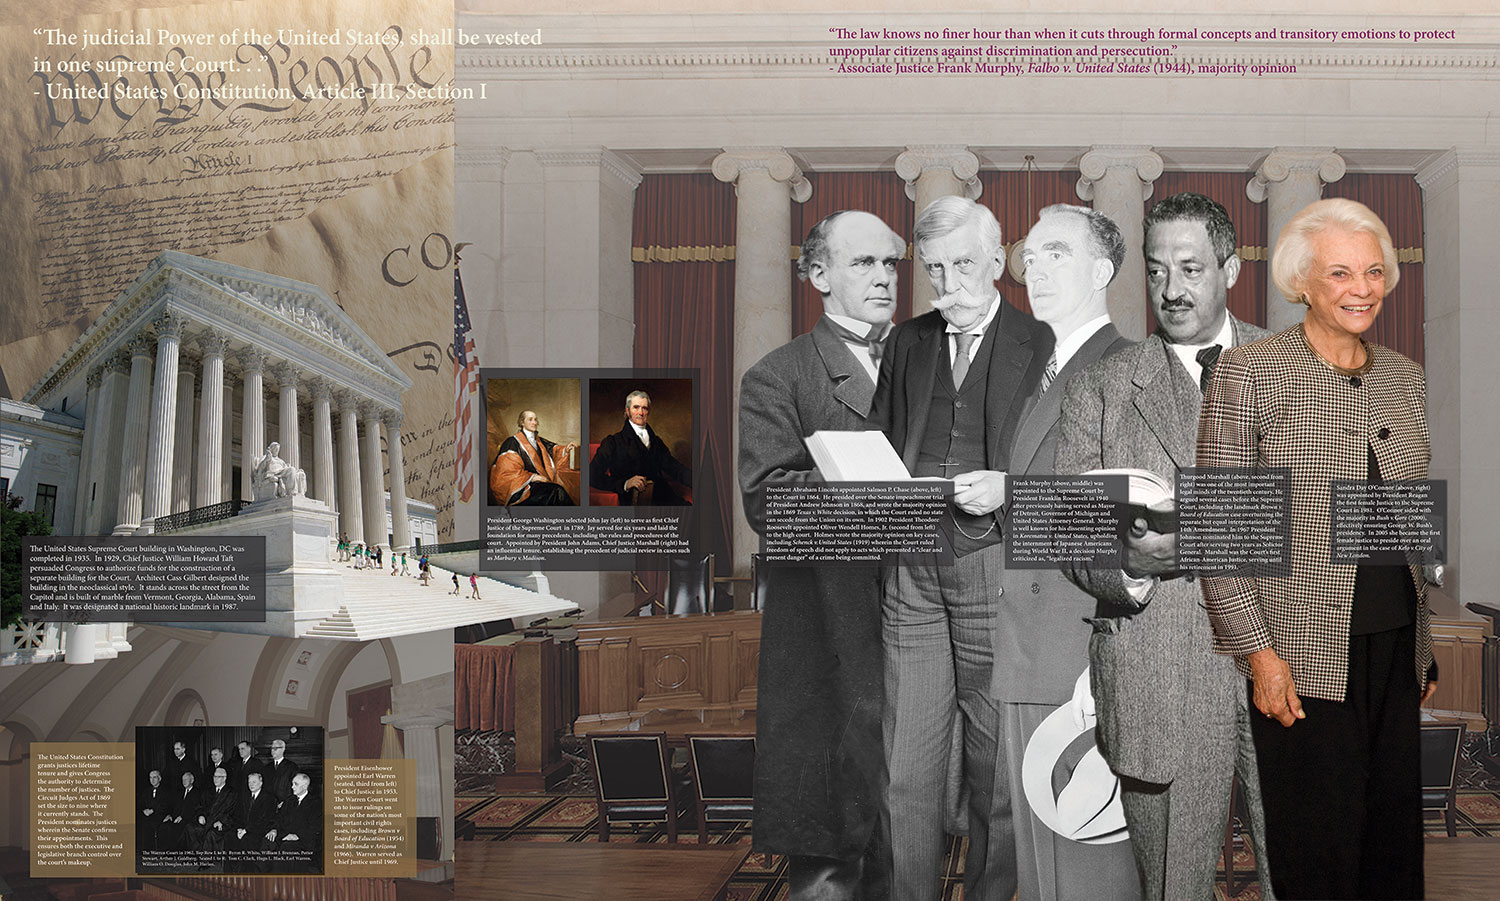 We the People:  the United States Supreme Court